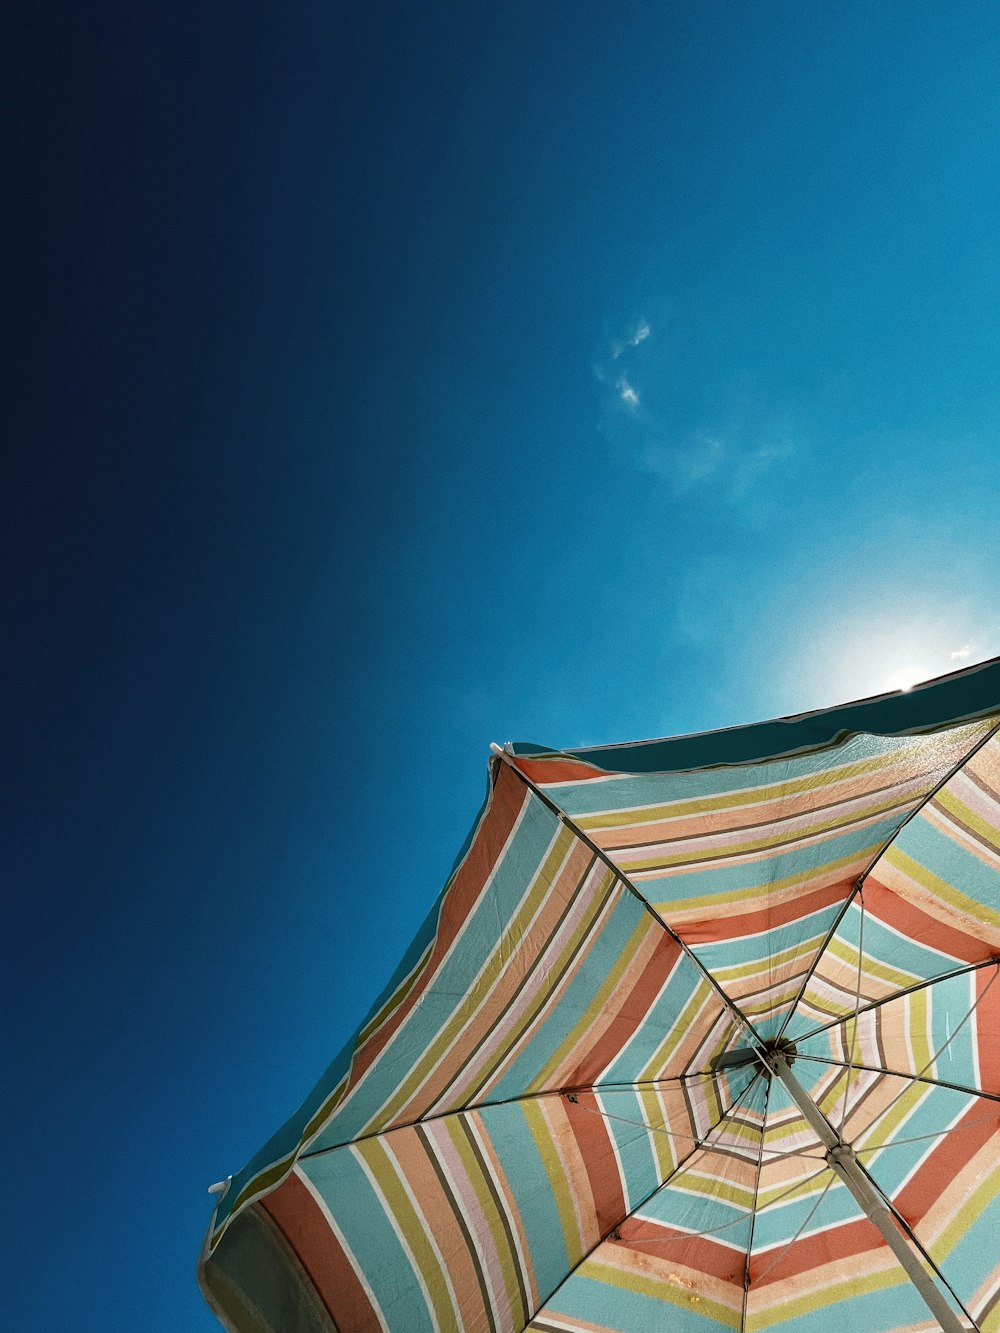 a striped umbrella with a blue sky in the background